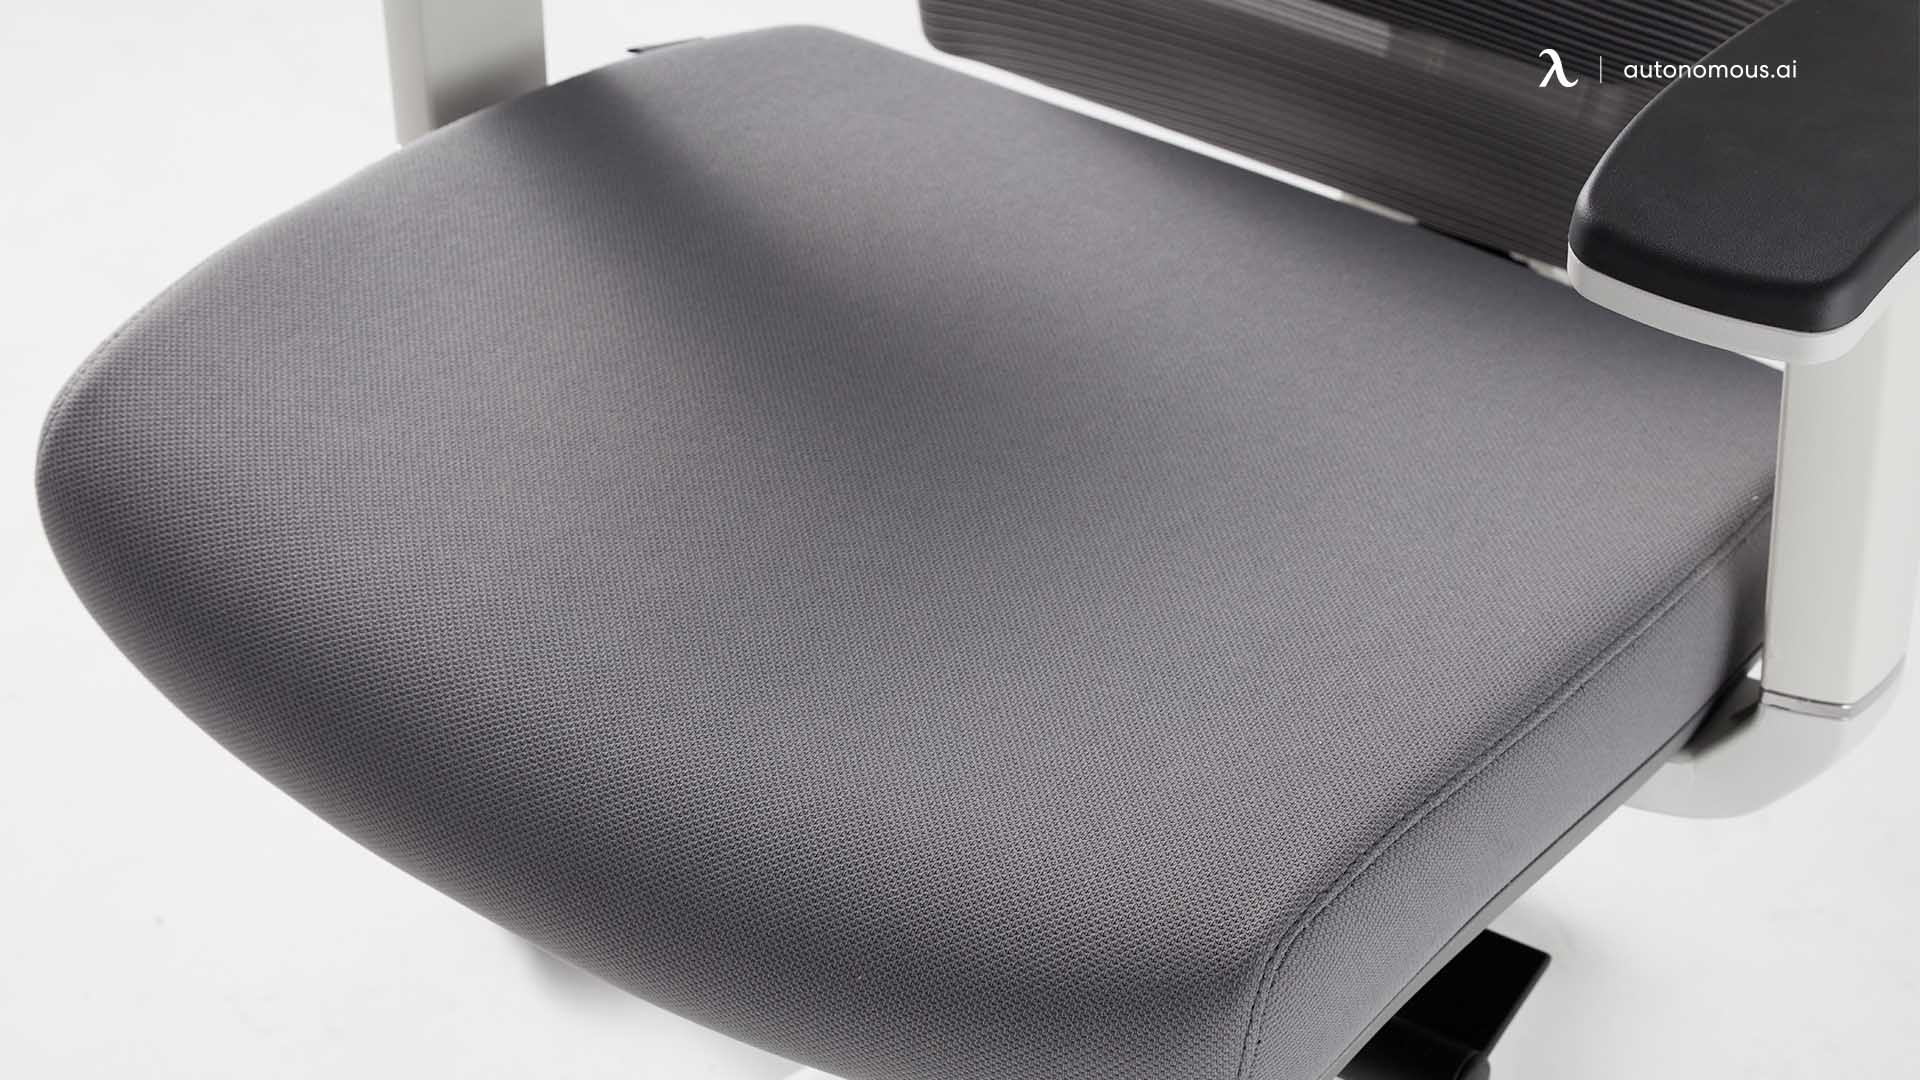 size of ergonomic office chair cushion